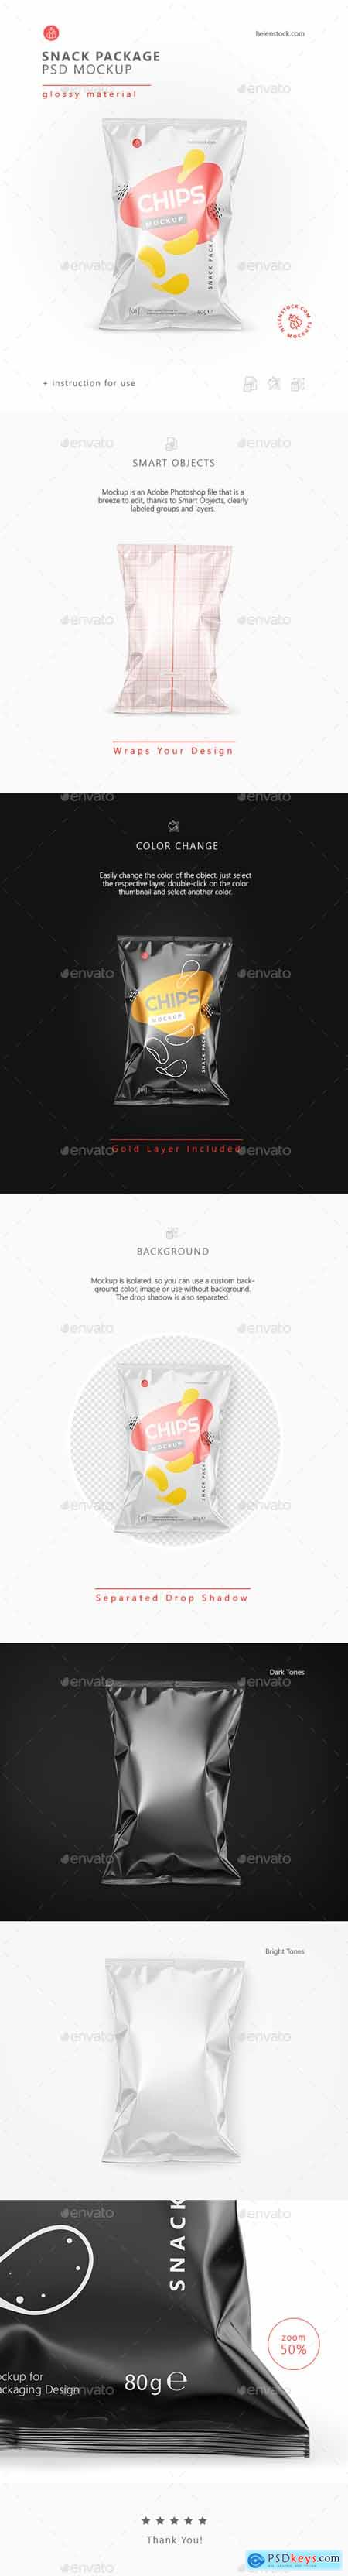 Glossy Snack Package Mockup - Front View 26538212